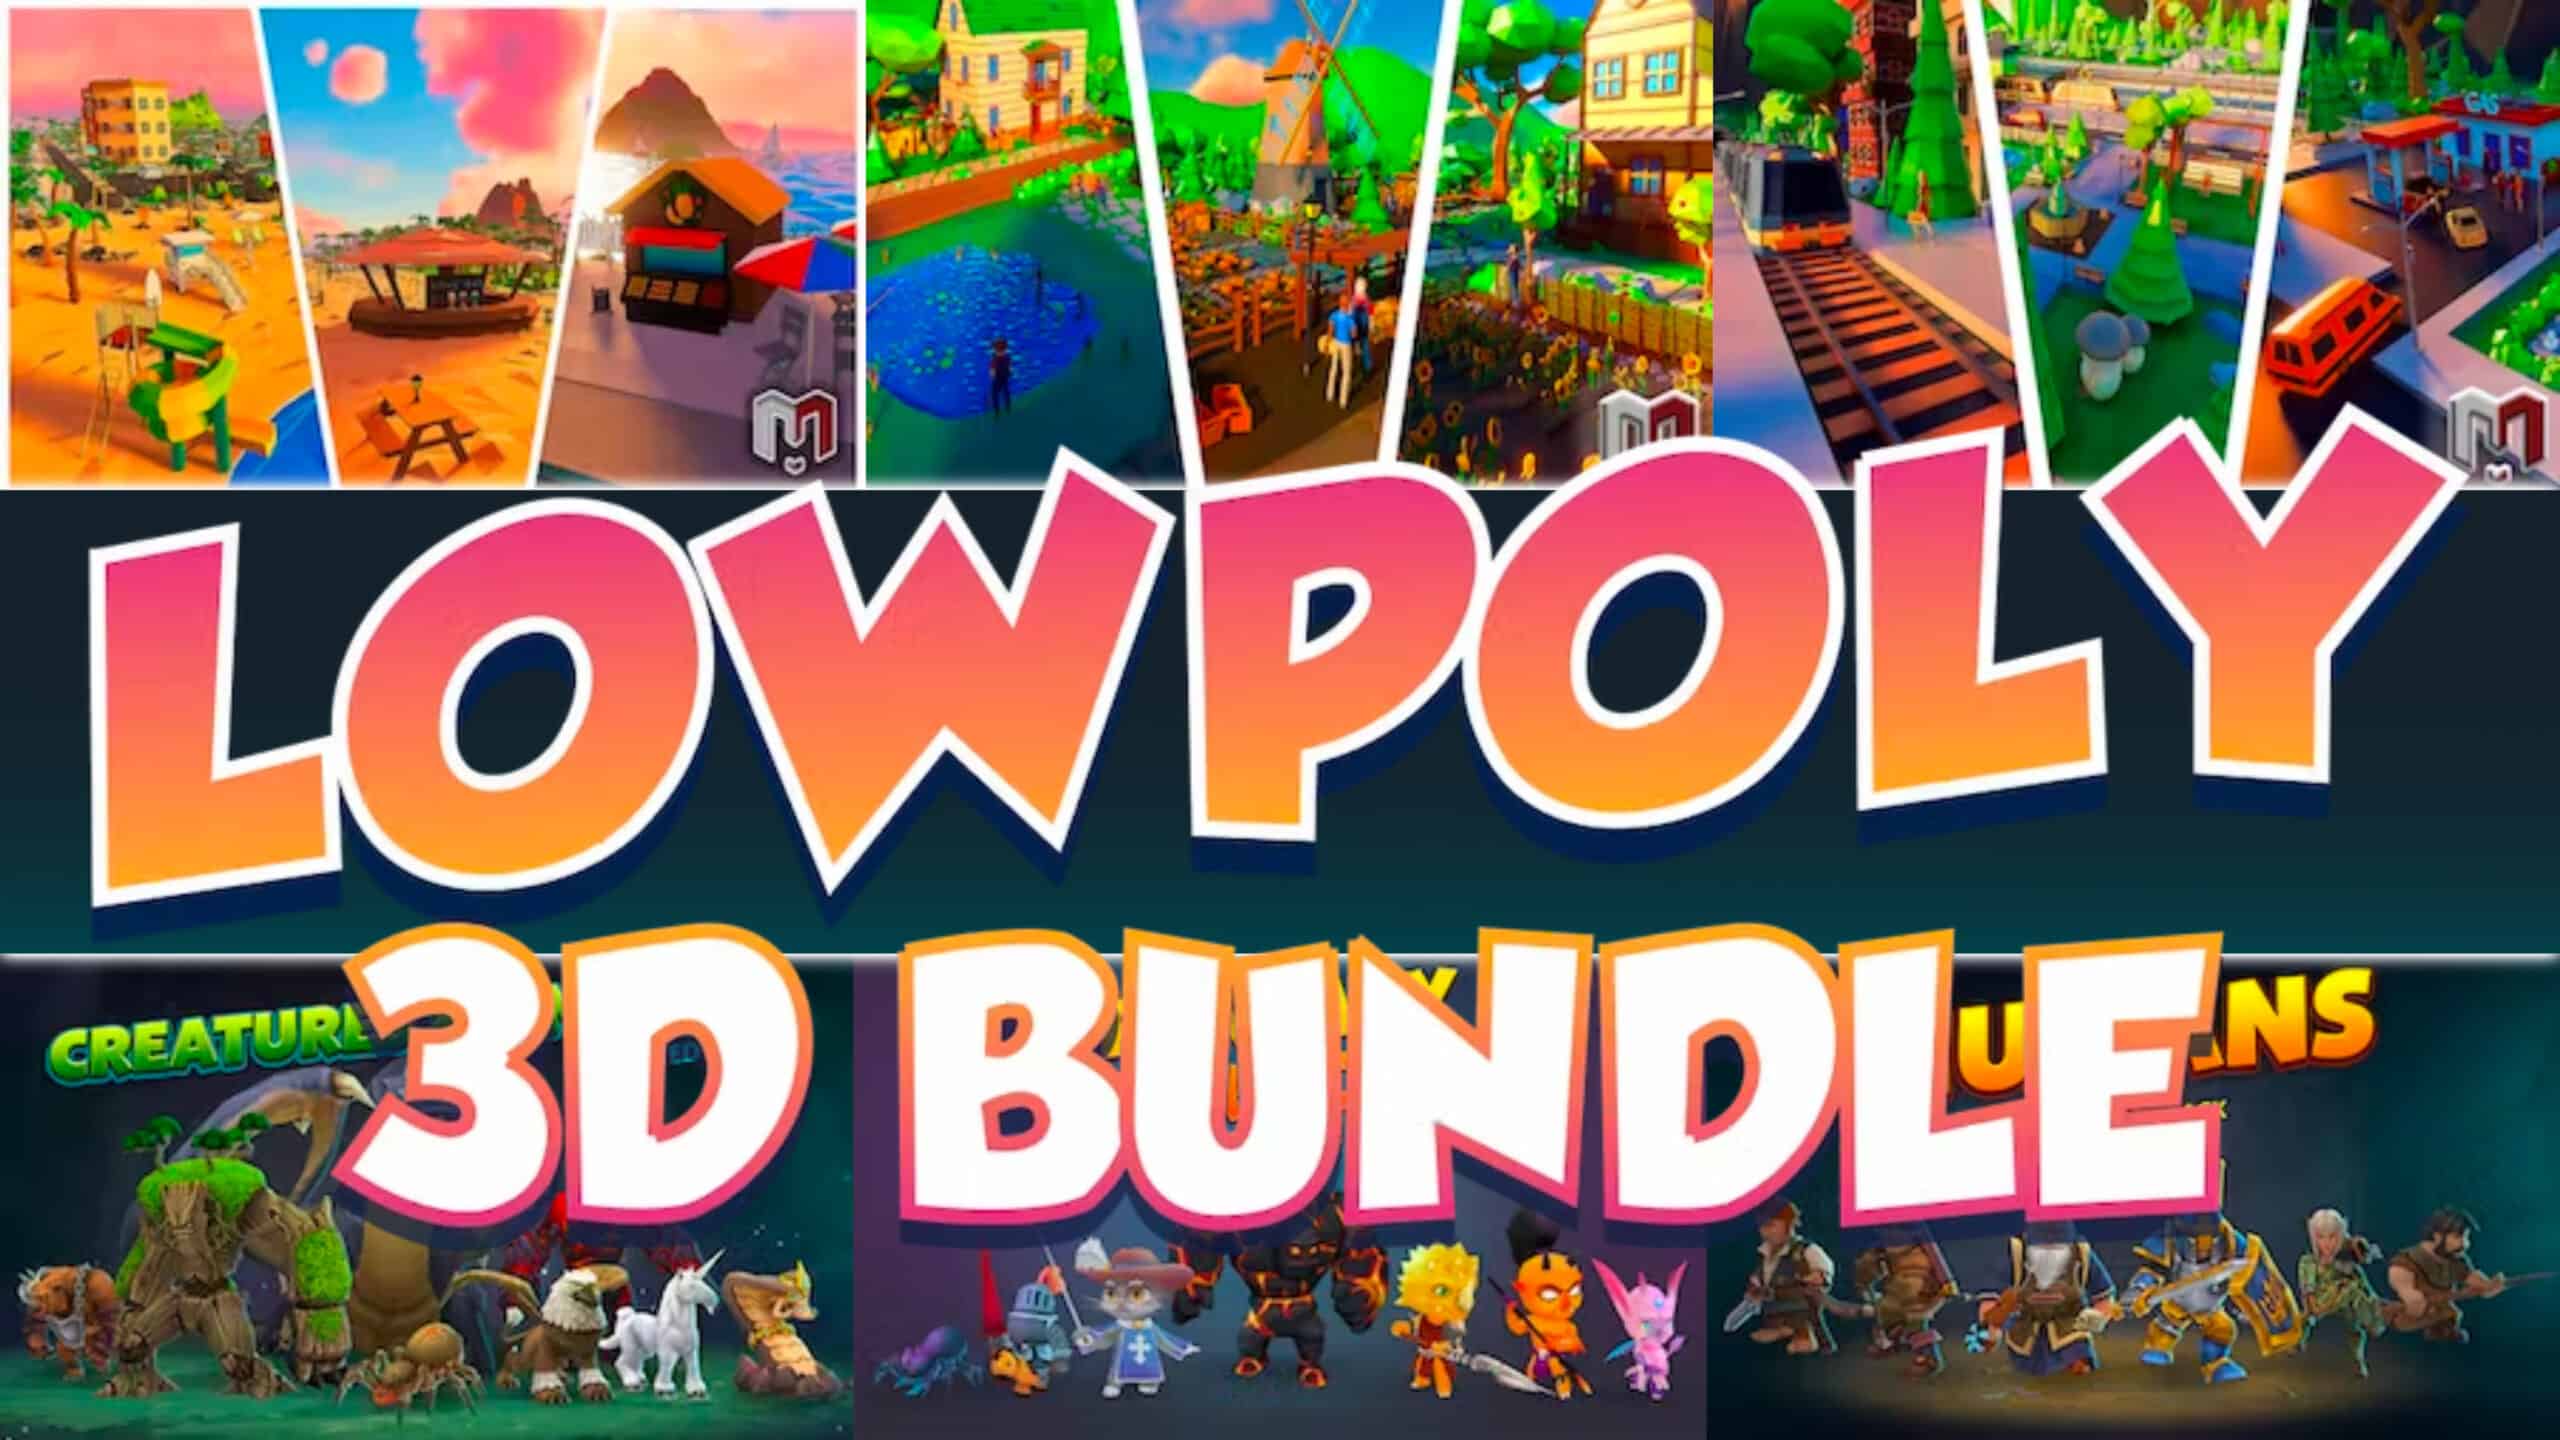 Humble Bundle] Masterful Modern 3D Platformers (Pay $9 for New